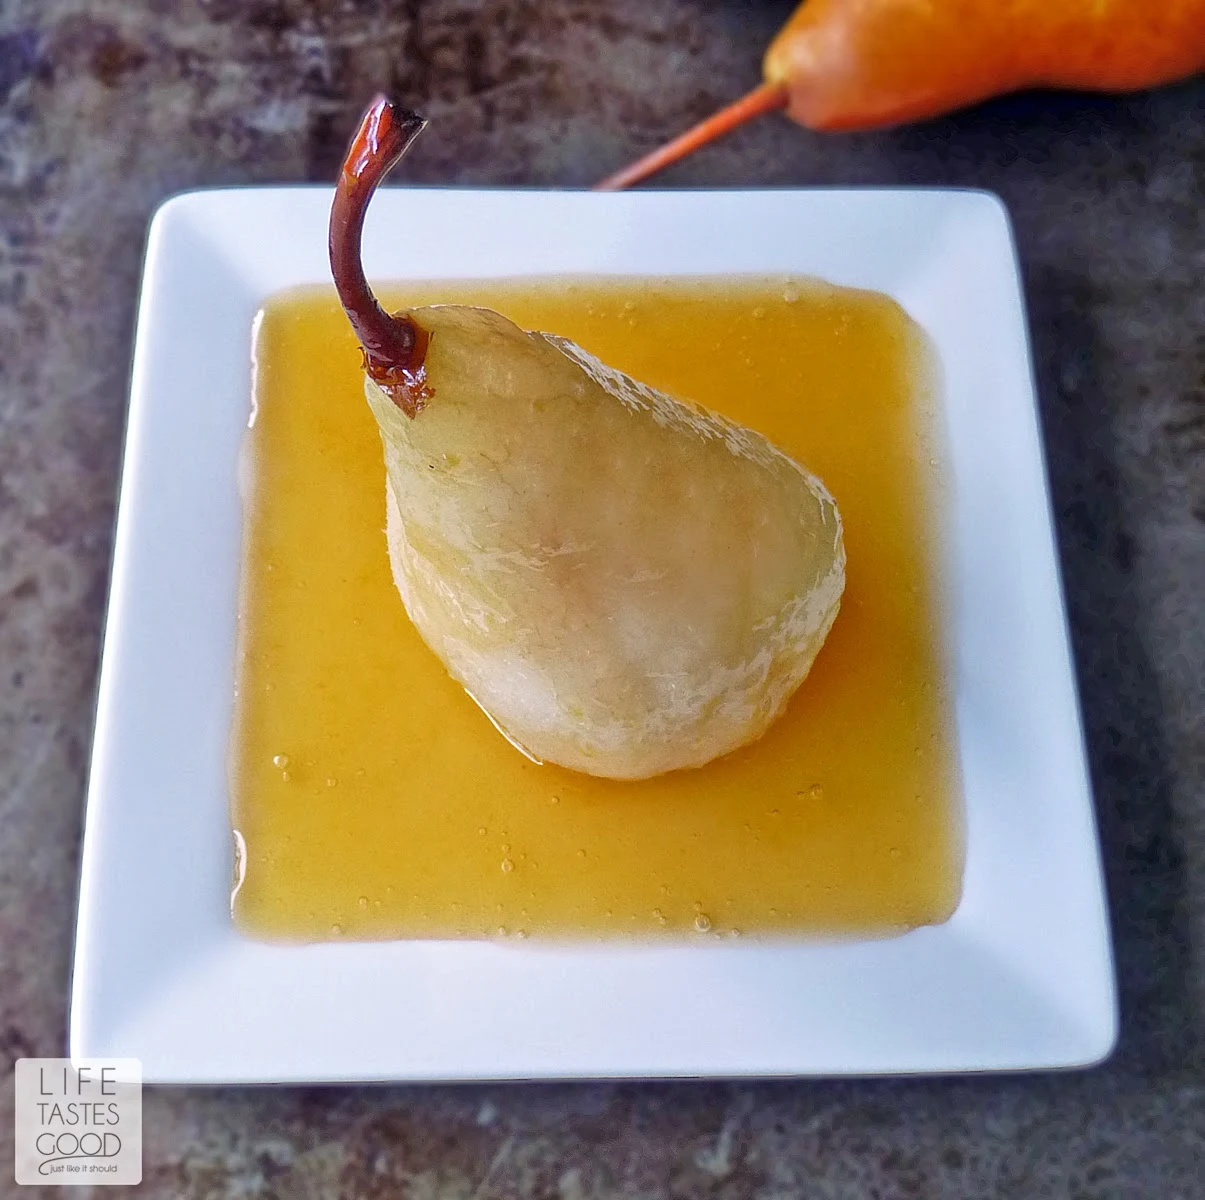 Vanilla Poached Pears with Apricot Sauce | by Life Tastes Good is an impressive dessert that will have everyone in awe of your culinary skills! We'll keep it just between us how easy these really are <wink>. #CleverlyPoached #CleverGirls